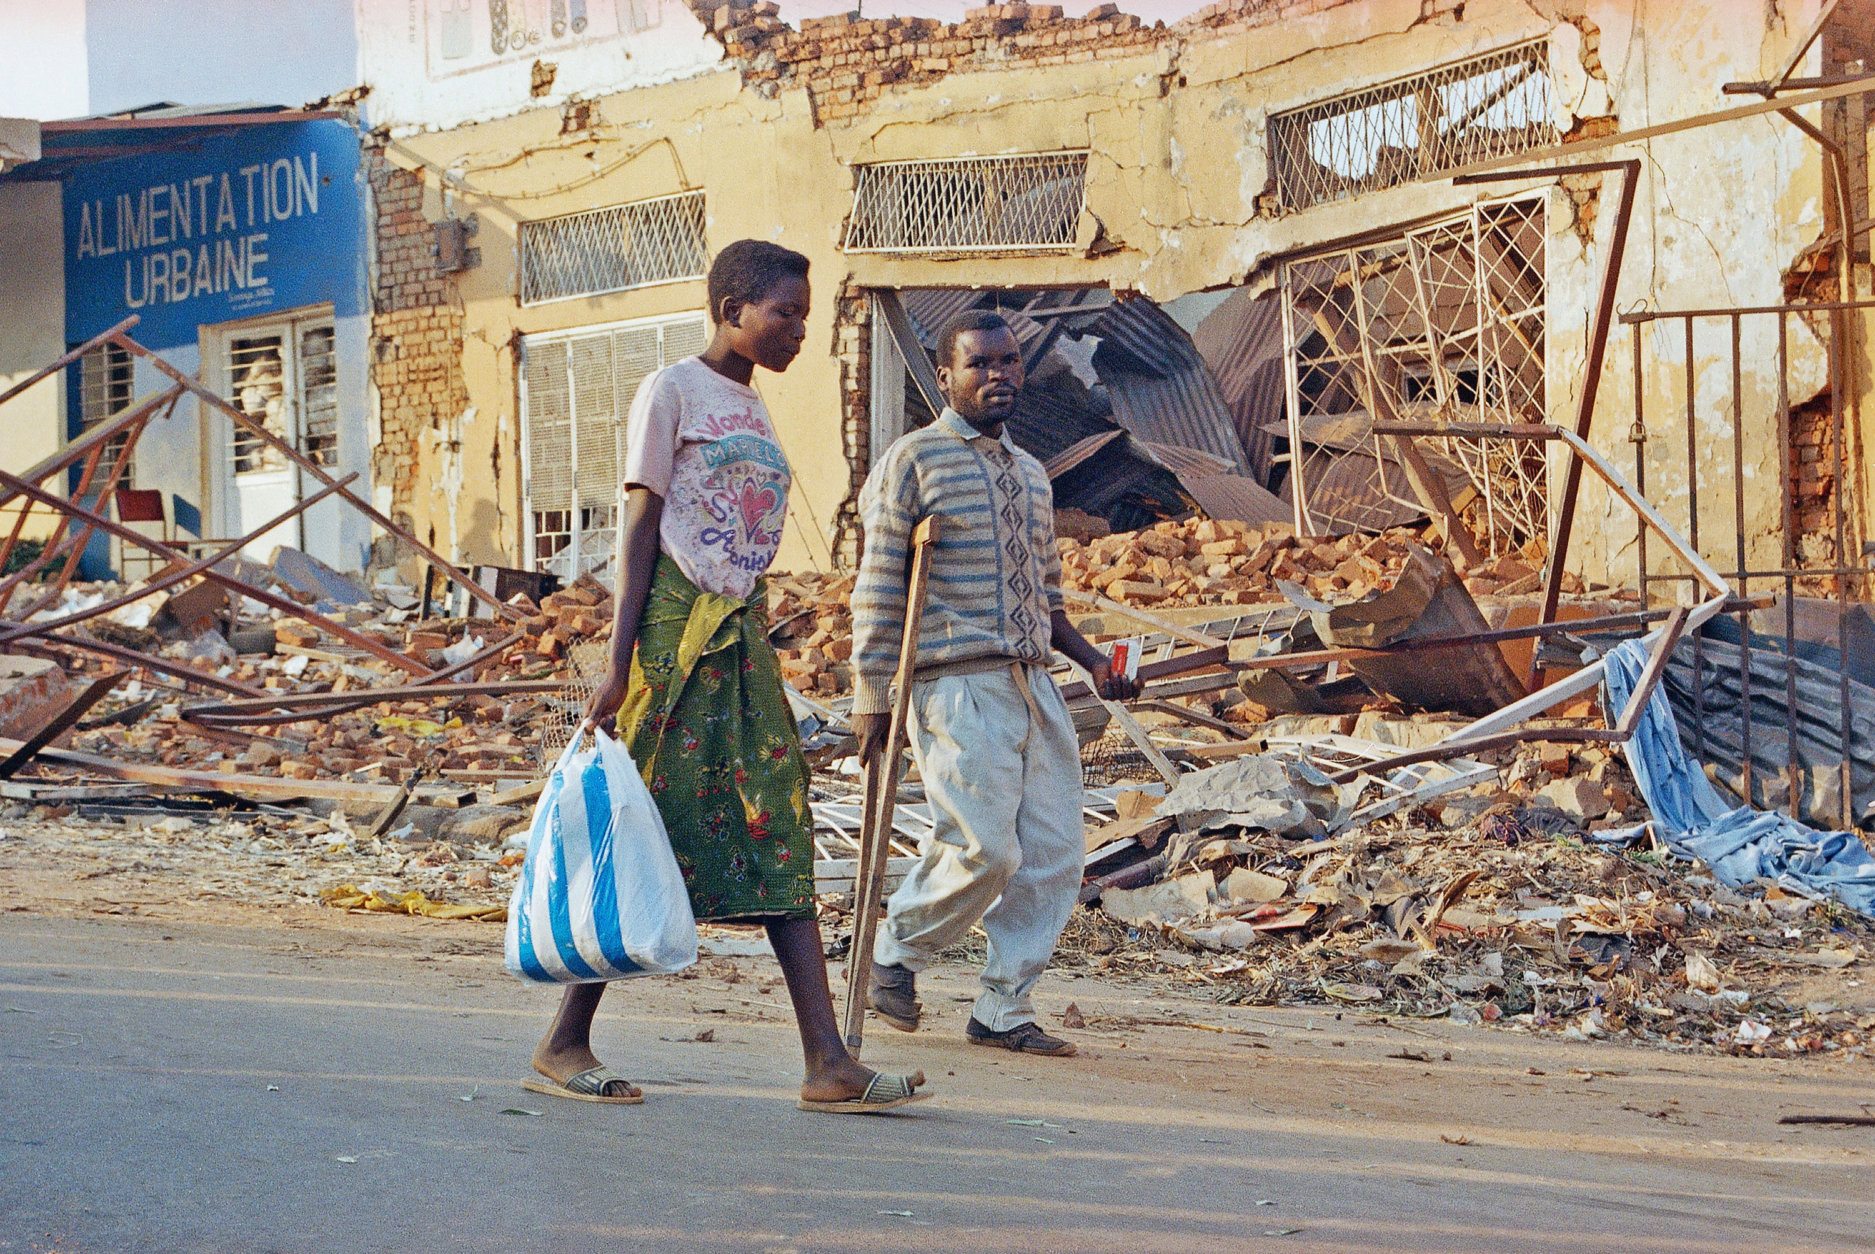 Kigali residents walk past debris in the city center, Wednesday, August 3, 1994. The U. S. Embassy reopened for the first time since a genocidal rampage caused most foreigners to leave nearly four months ago. The death of Rwanda's president in a mysterious plane crash touched off ethnic slaughter and reignited a civil war that together claimed 350,000 to 500,000 lives. Most of the dead were minority Tutsis slain by Hutu soldiers and militiamen. The victorious Tutsi-dominated rebels installed a new government July 18. (AP Photo/Dominic Cunningham-Reid)